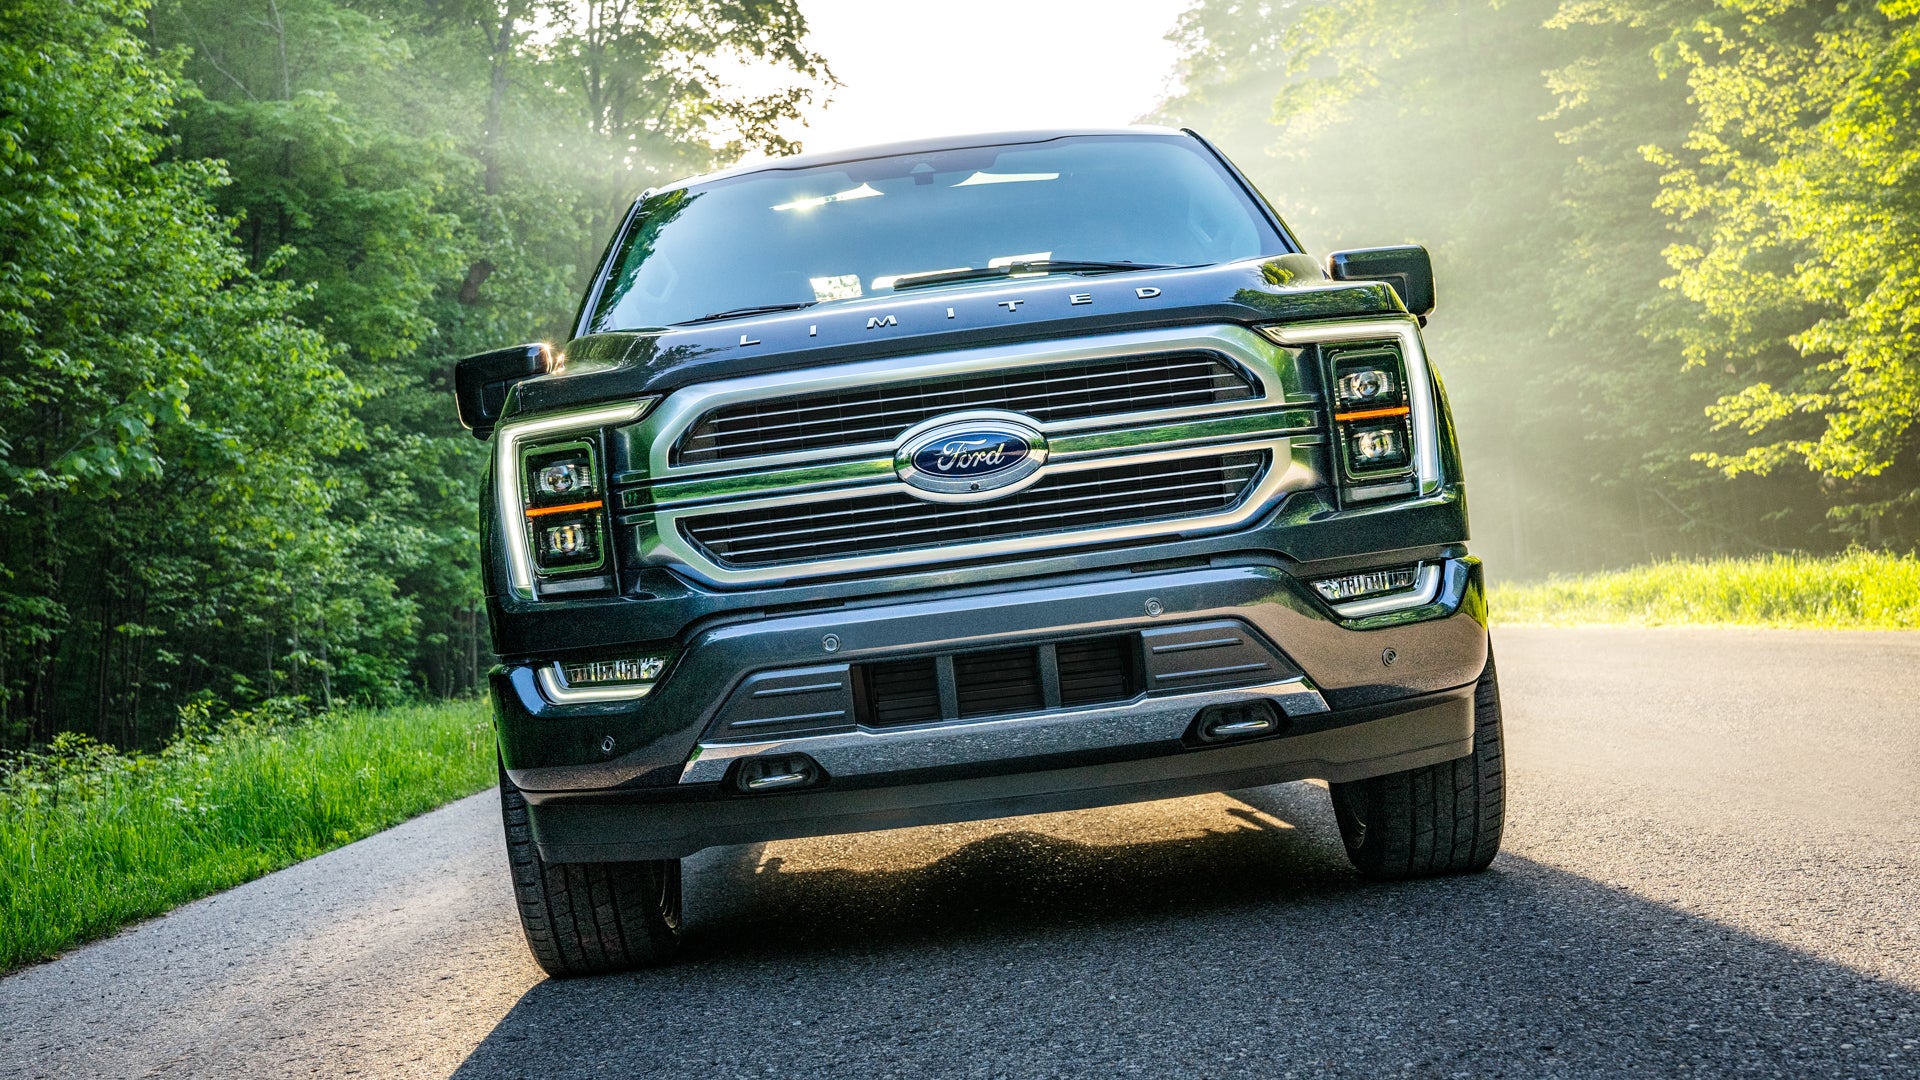 Ford wants to offer a bolt-on third axle for the F-150